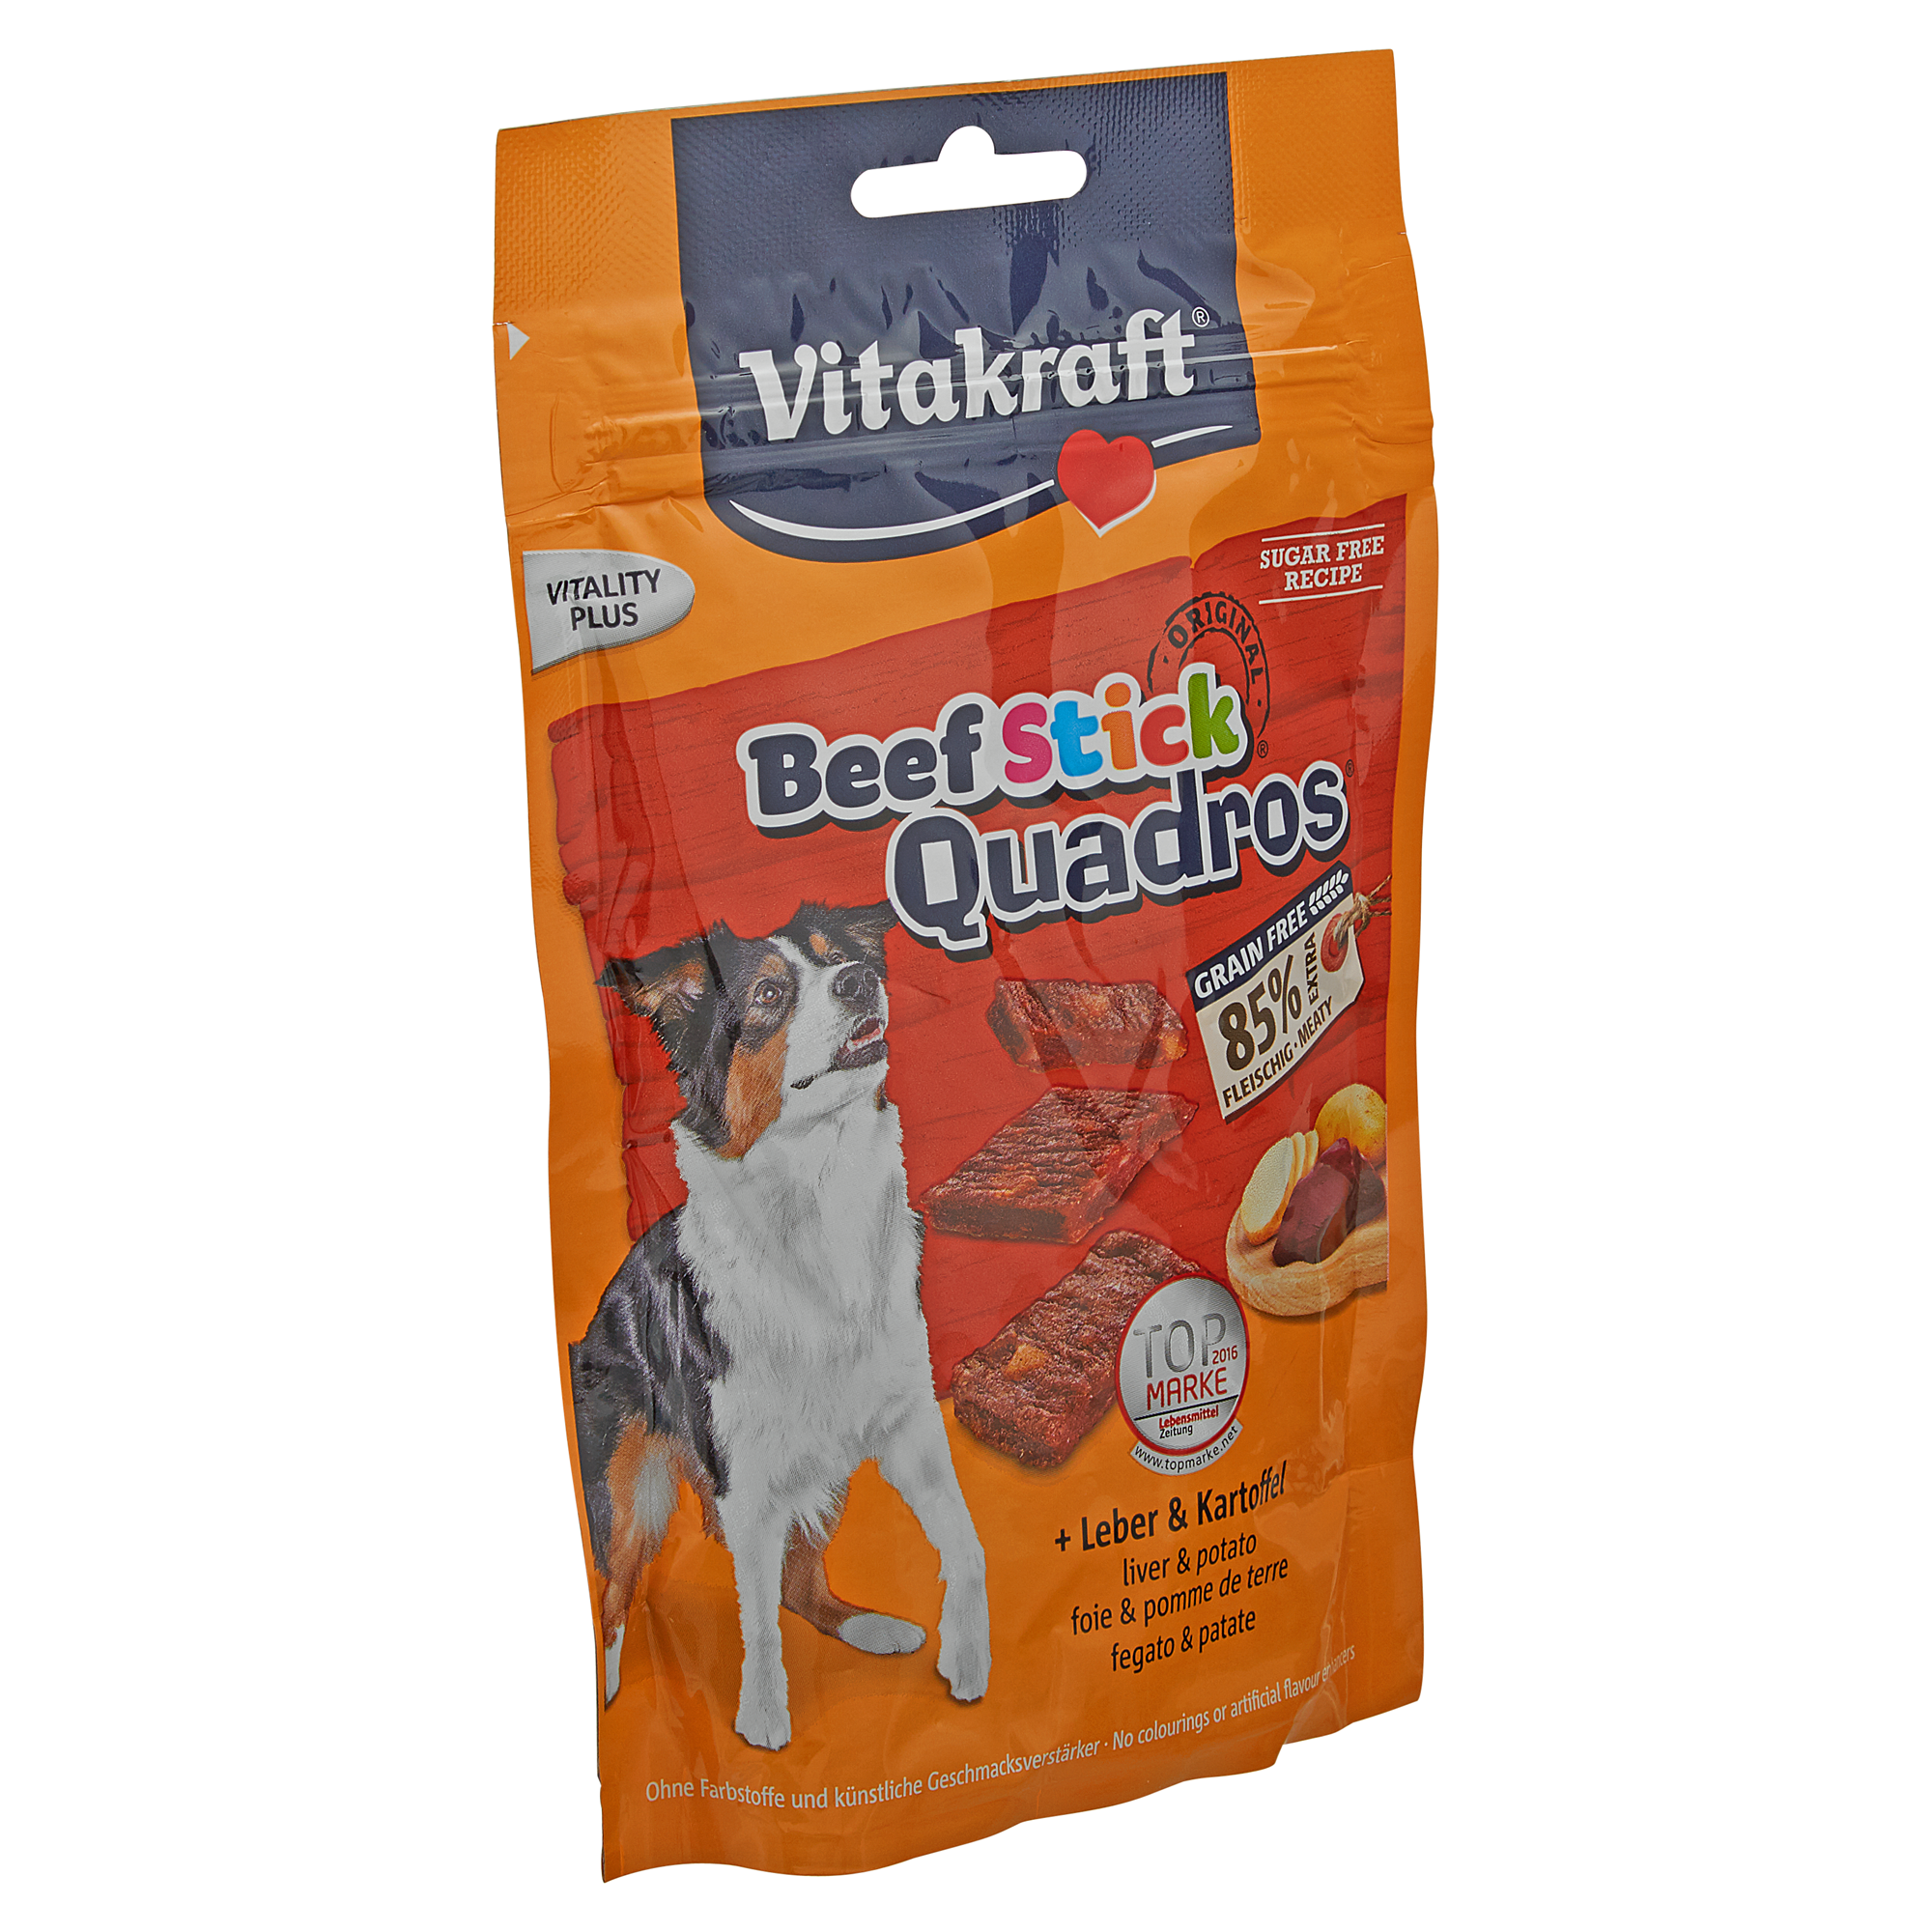 Hundesnack "Beef Stick Quadros" mit Leber/Kartoffel 70 g + product picture